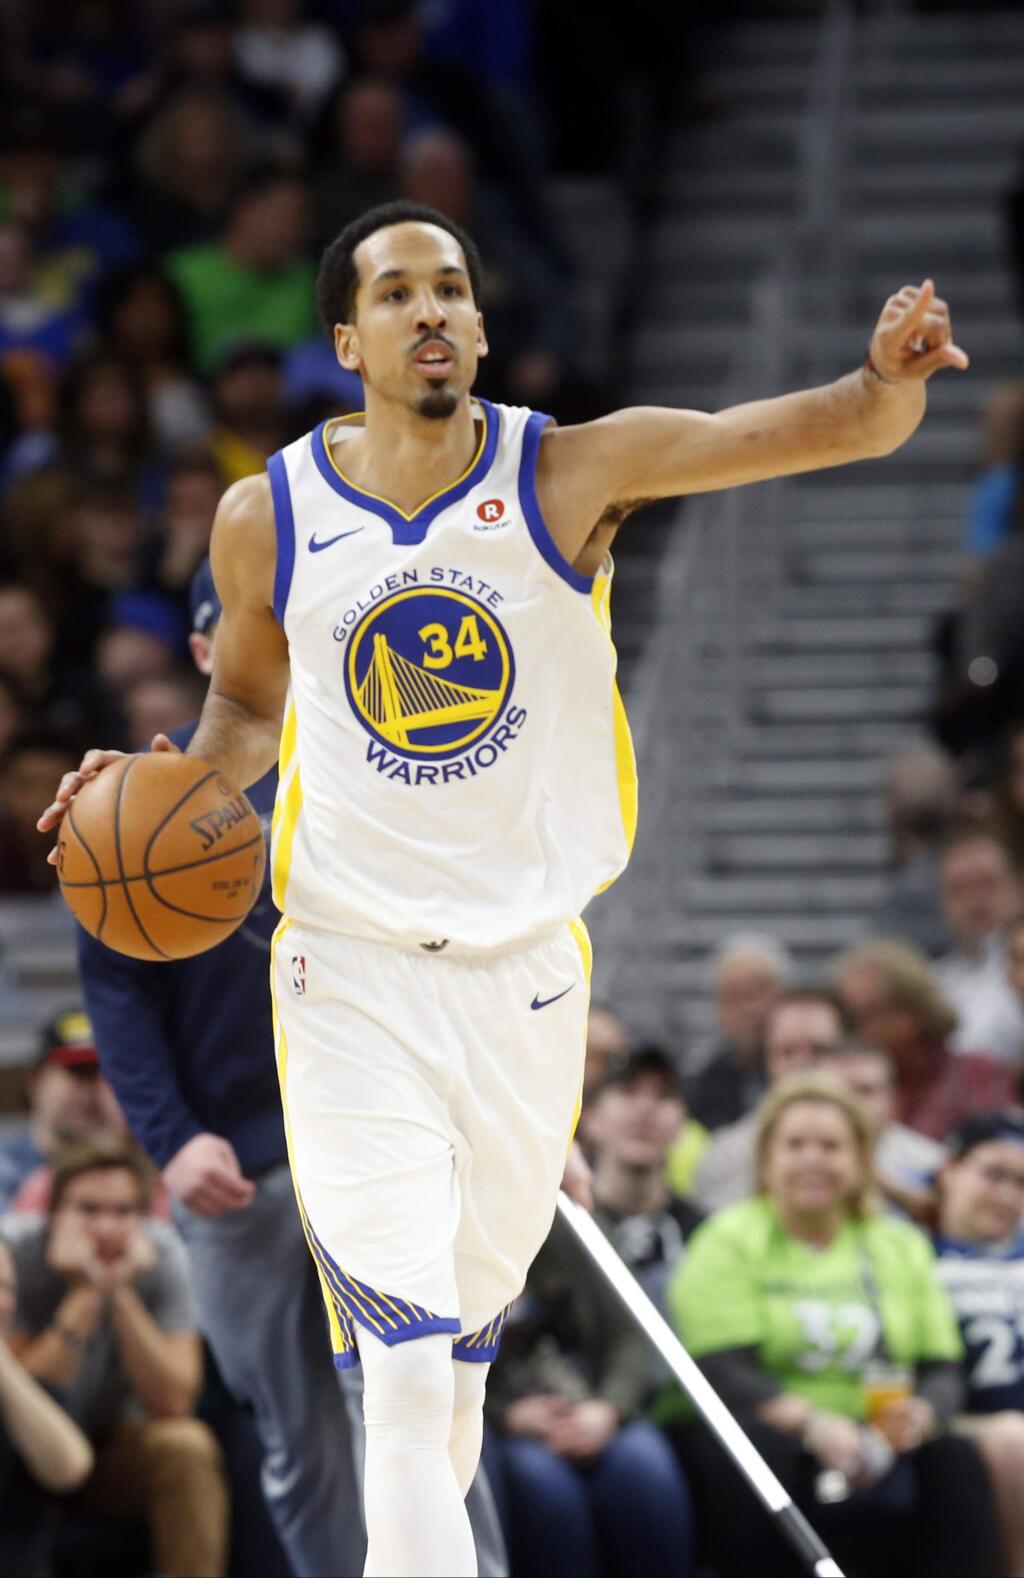 The Golden State Warriors' Shaun Livingston plays against the Minnesota Timberwolves Sunday, March 11, 2018, in Minneapolis. (AP Photo/Jim Mone)